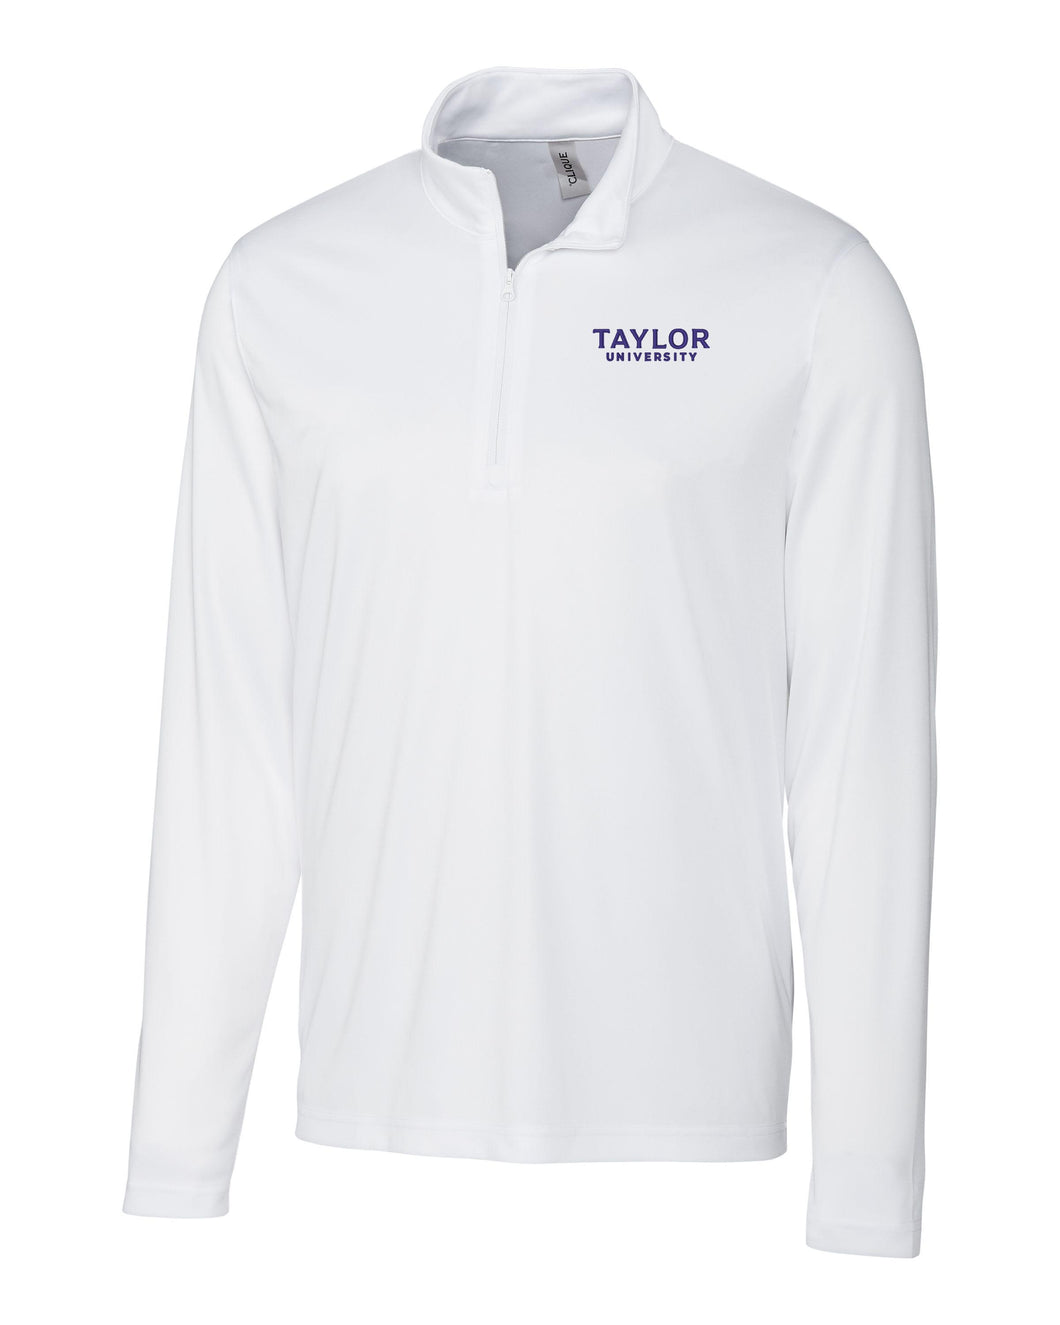 Spin Eco Performance 1/4 Zip Pullover, White (NEW LOGO)